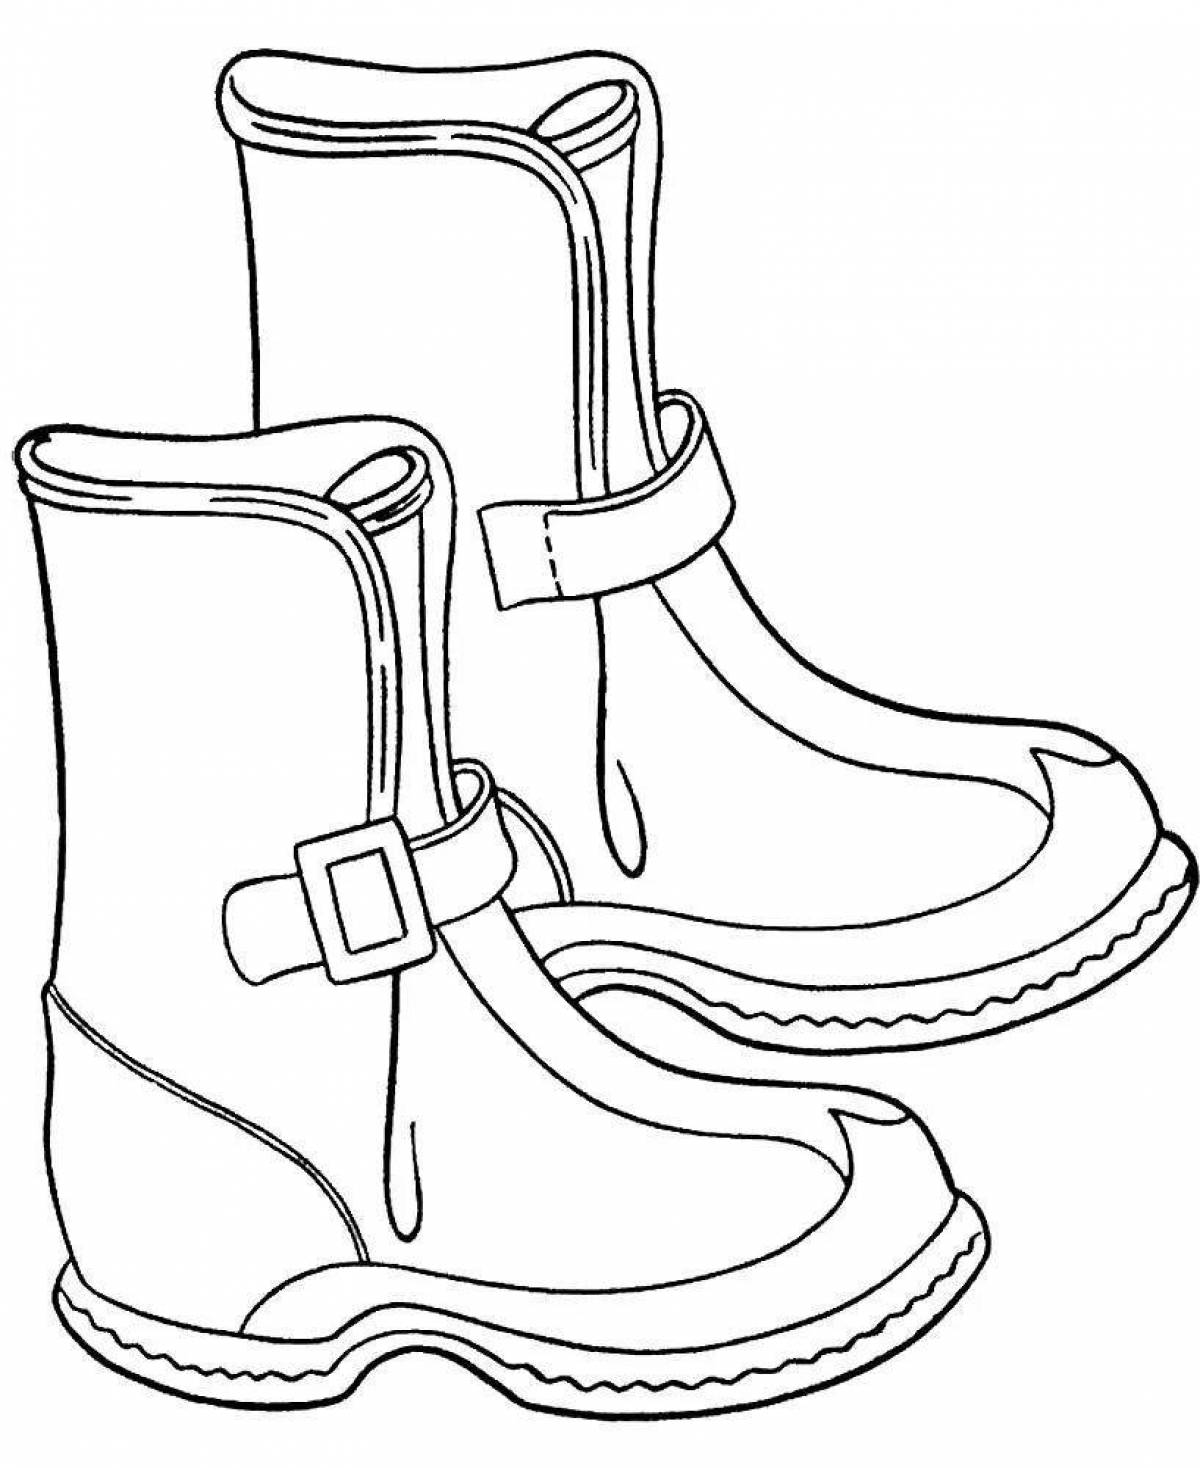 Radiant boot coloring page